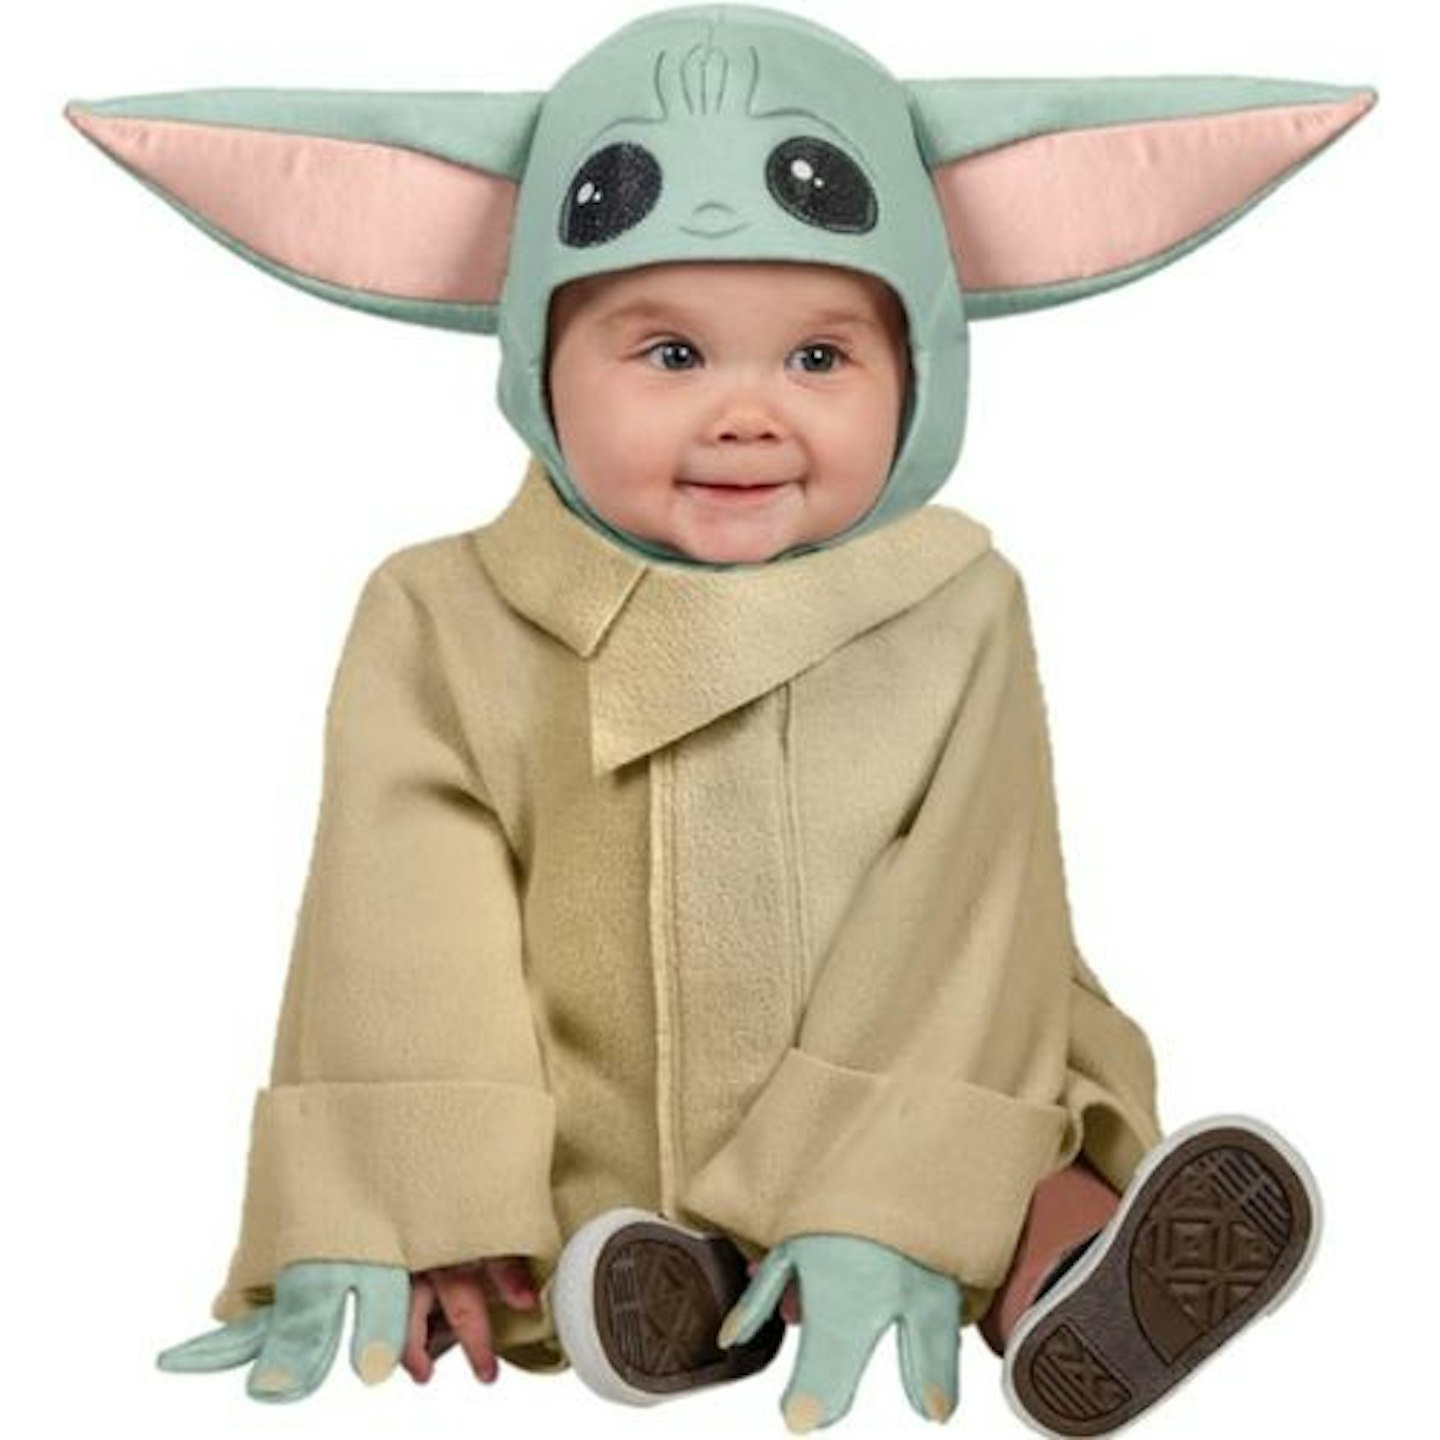 Kids Halloween Costumes: Rubie's Official Disney Star Wars The Child Costume